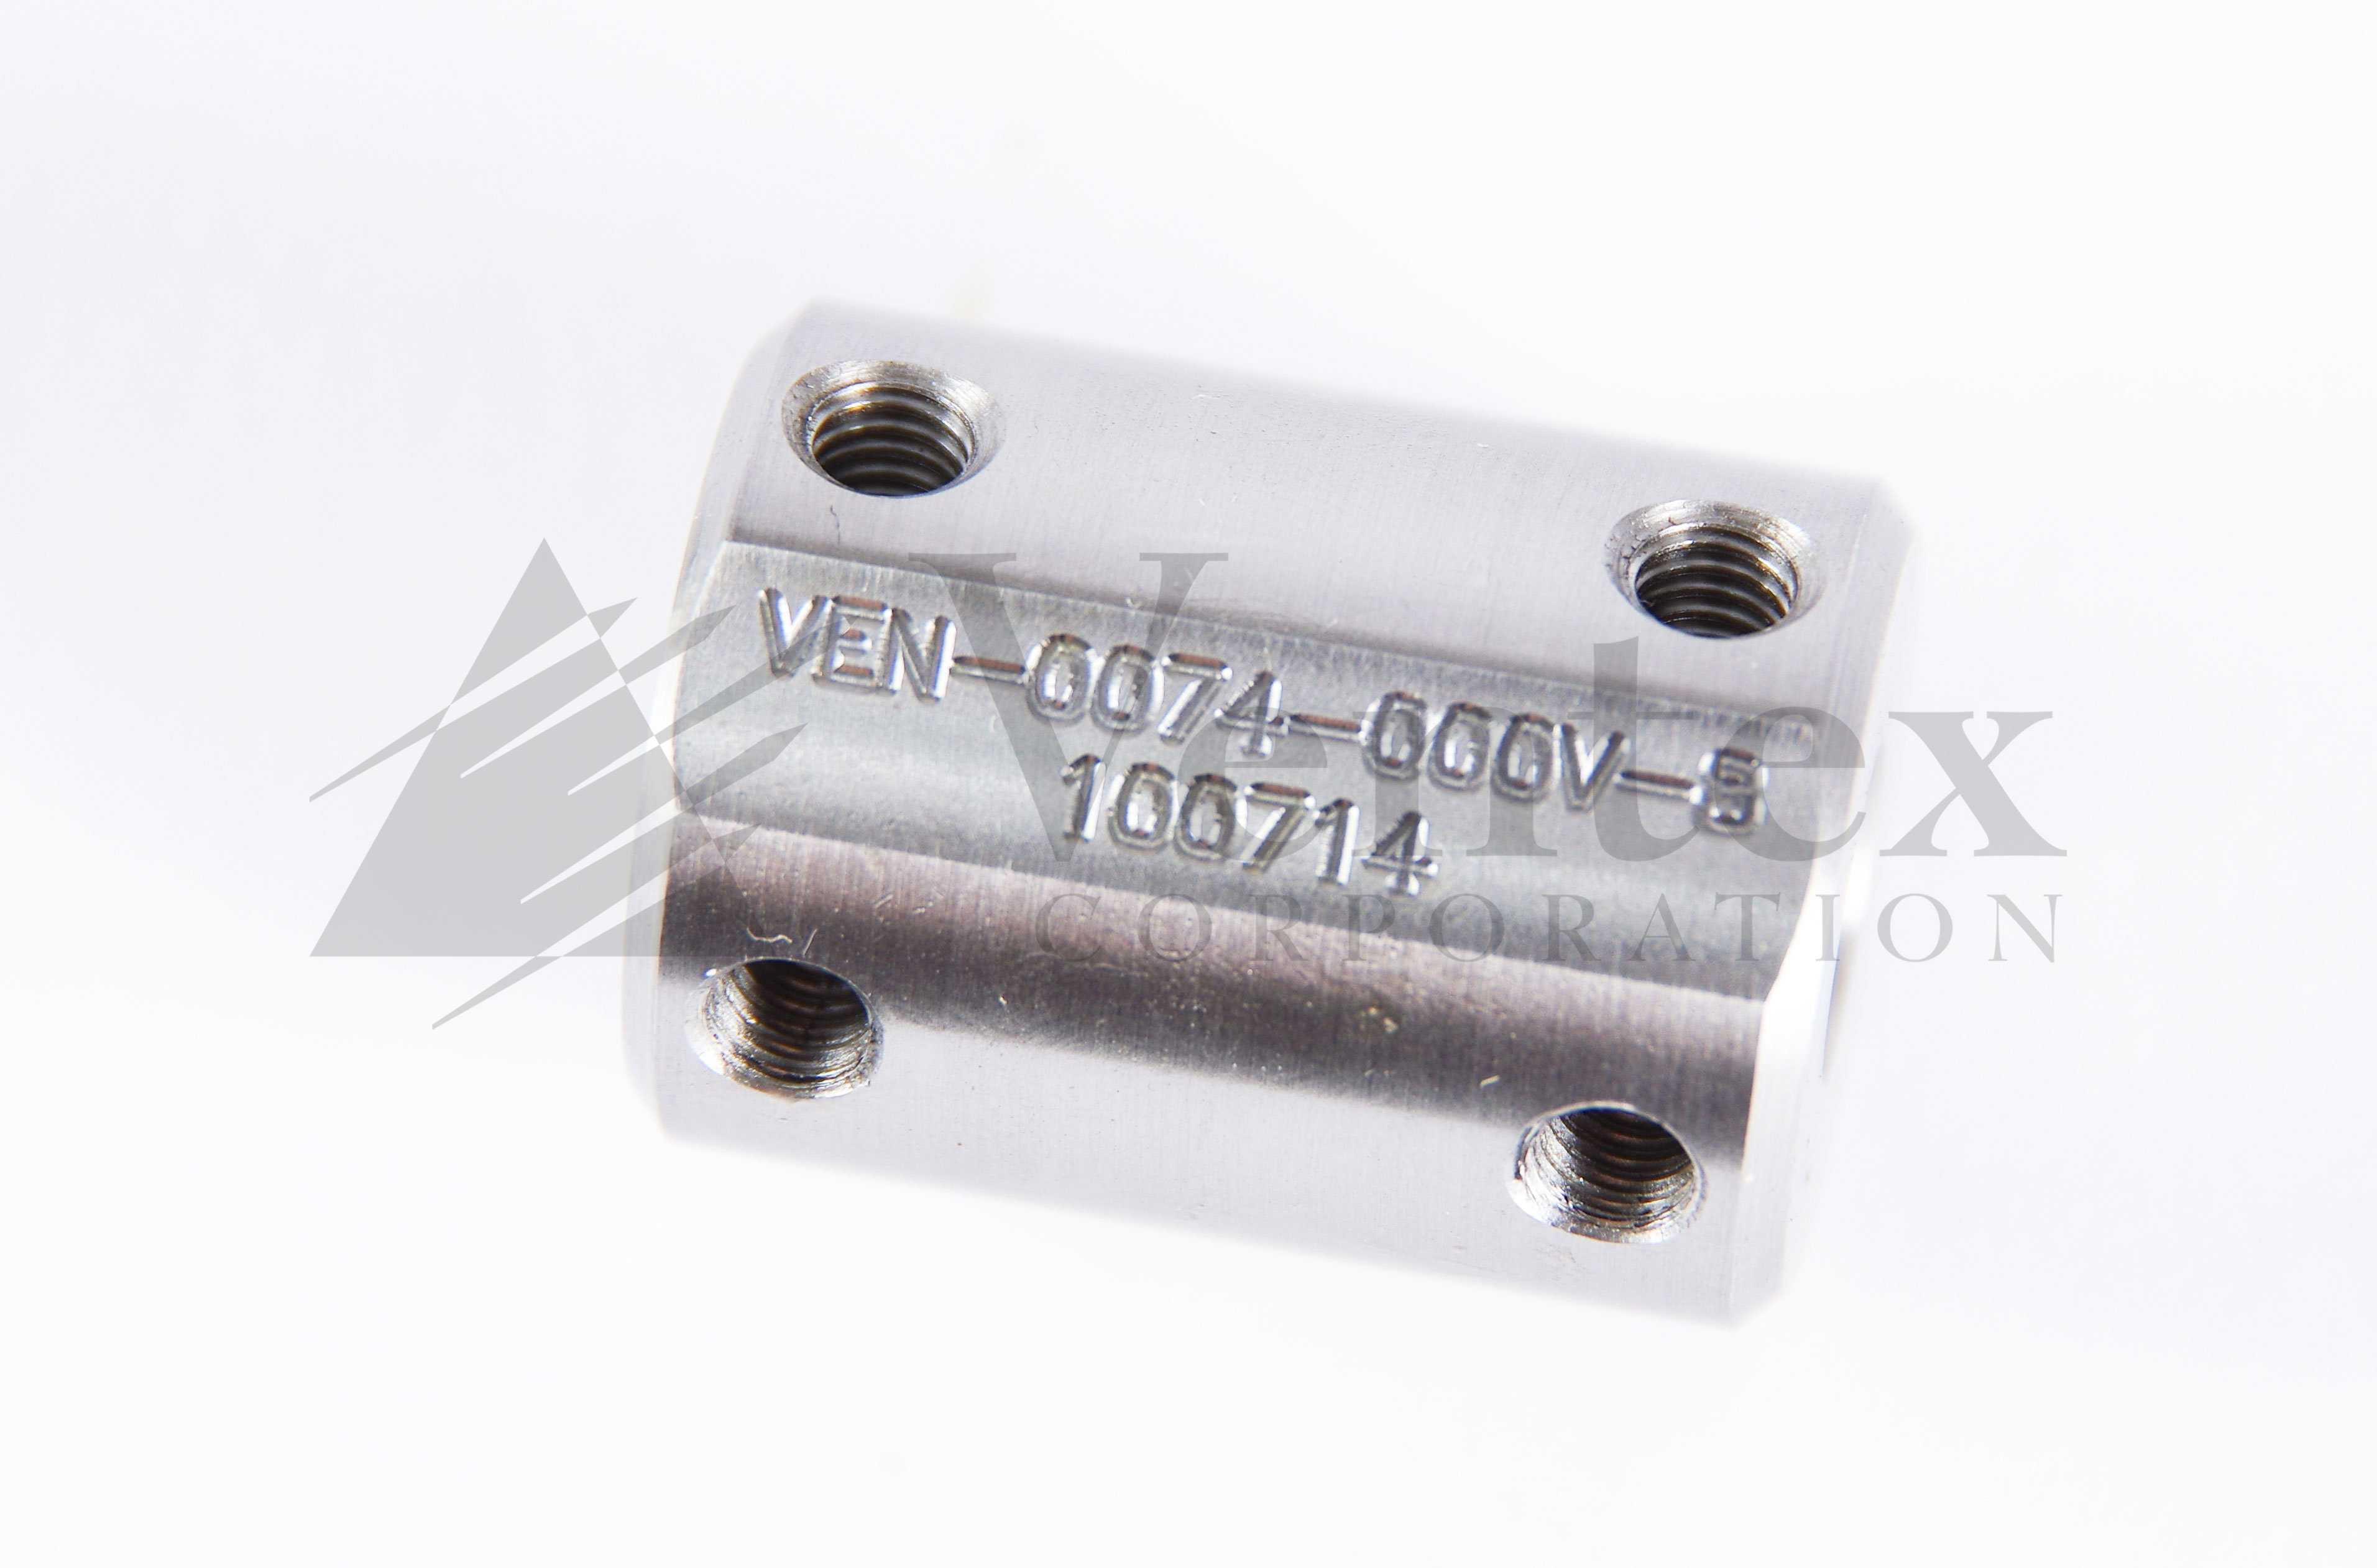 XY-Stage-Motor-Coupler-New-Style-Motor-(27mm)